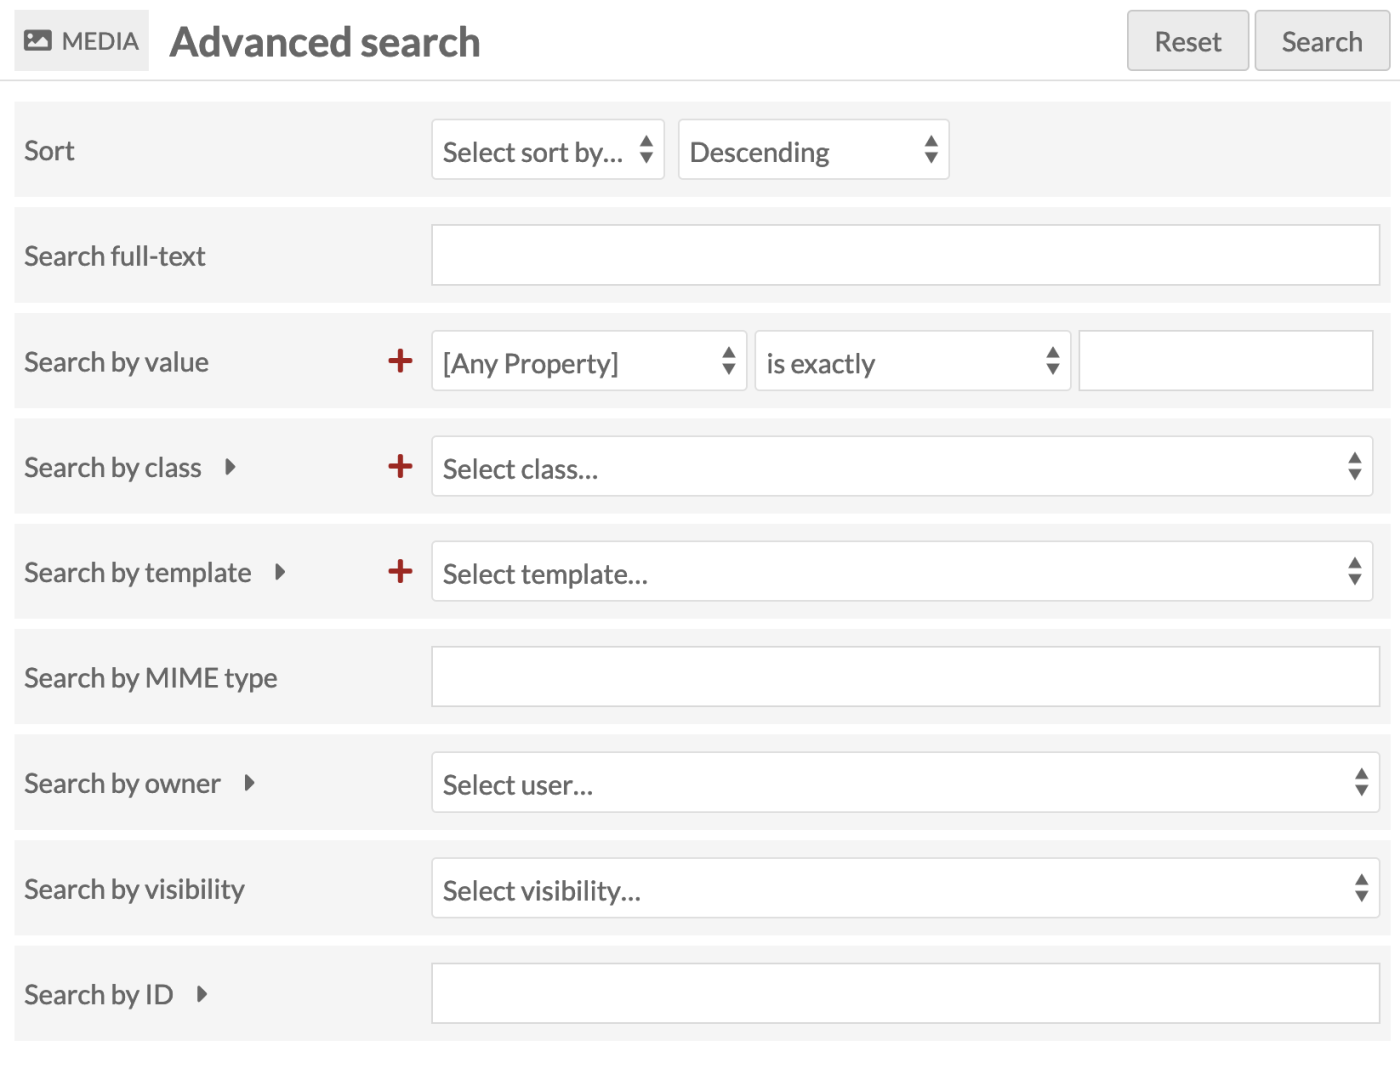 Advanced media search options form, with fields as described above.